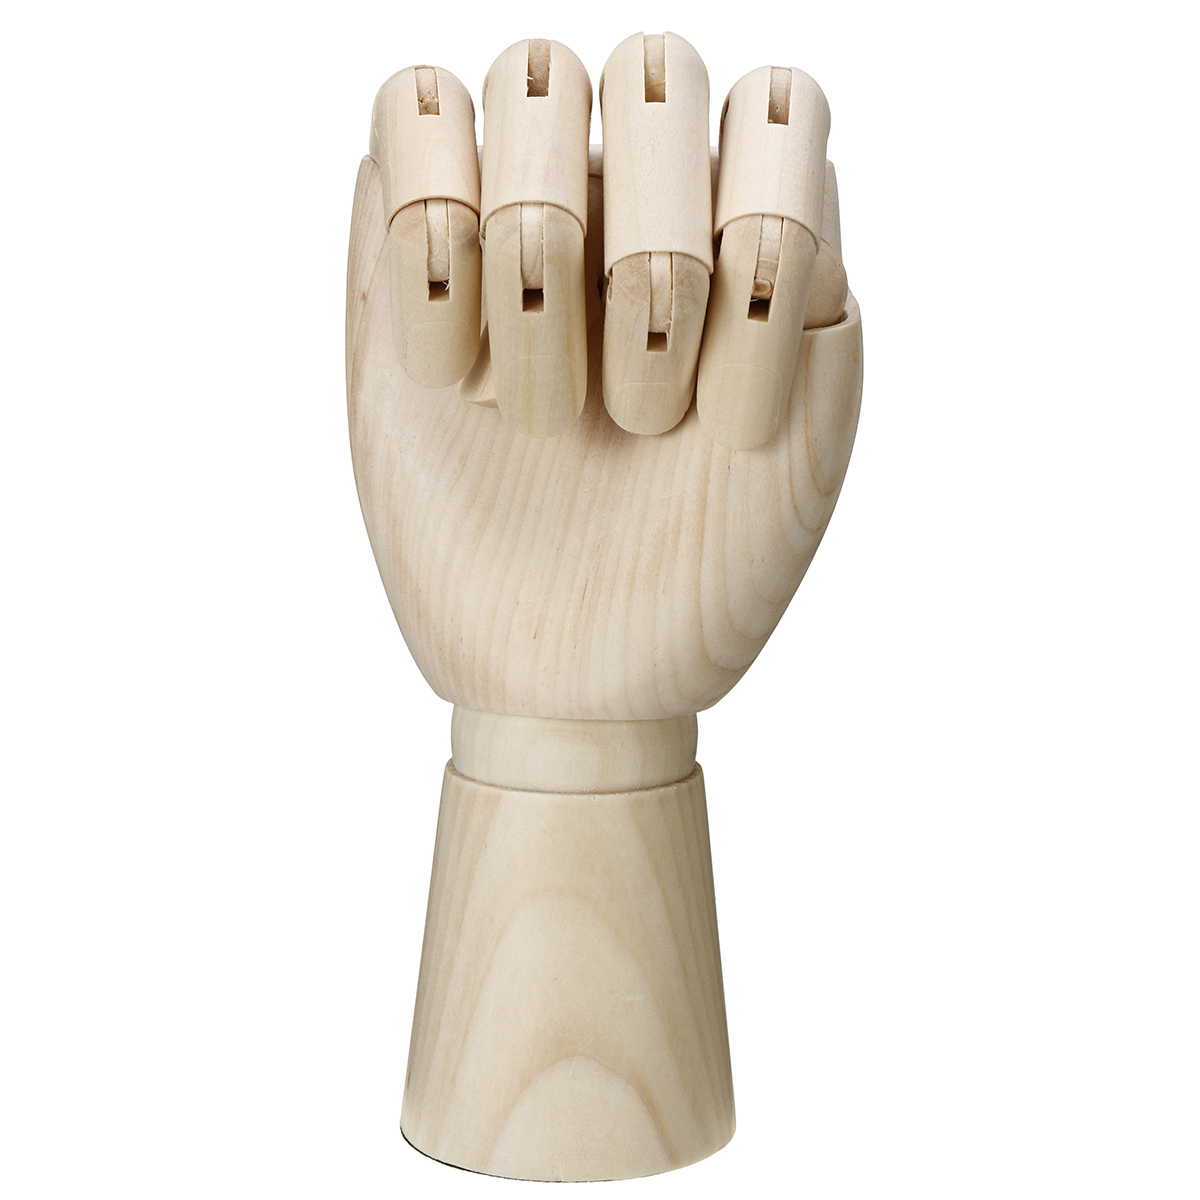 781012-Inch-Wooden-Hand-Body-Artist-Medical-Model-Flexible-Jointed-Wood-Sculpture-DIY-Education-1322443-6